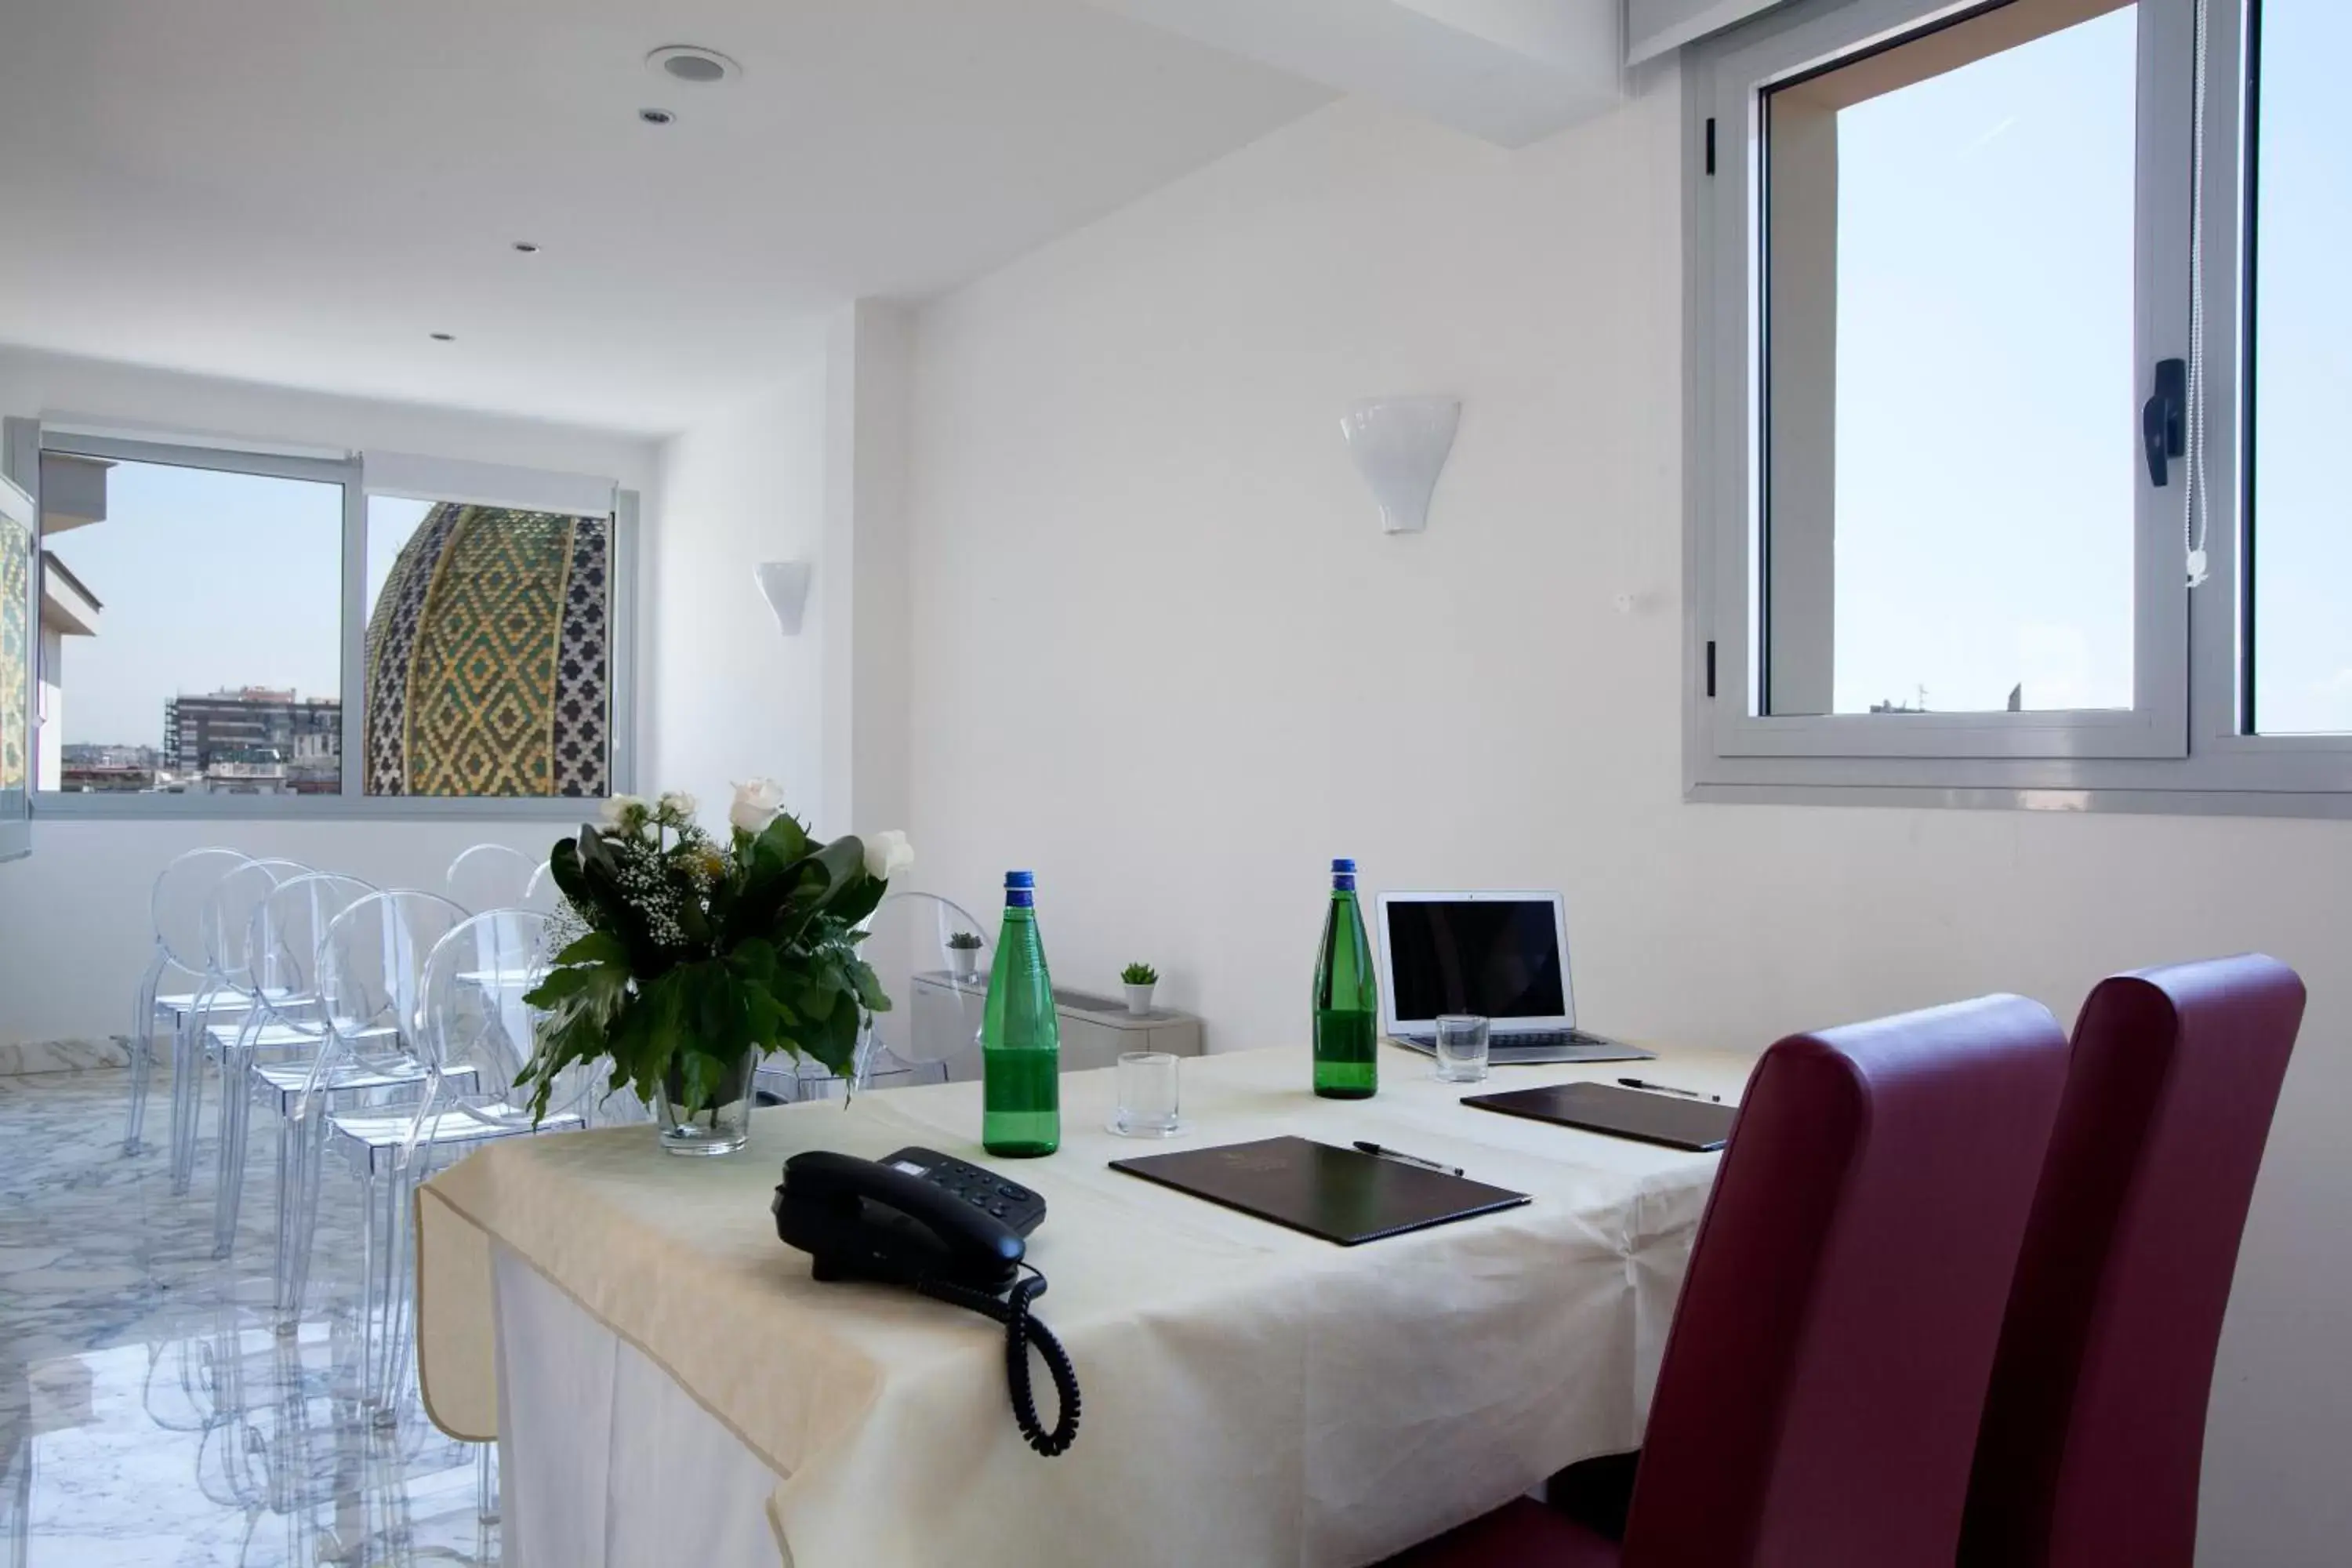 Business facilities in Hotel Naples